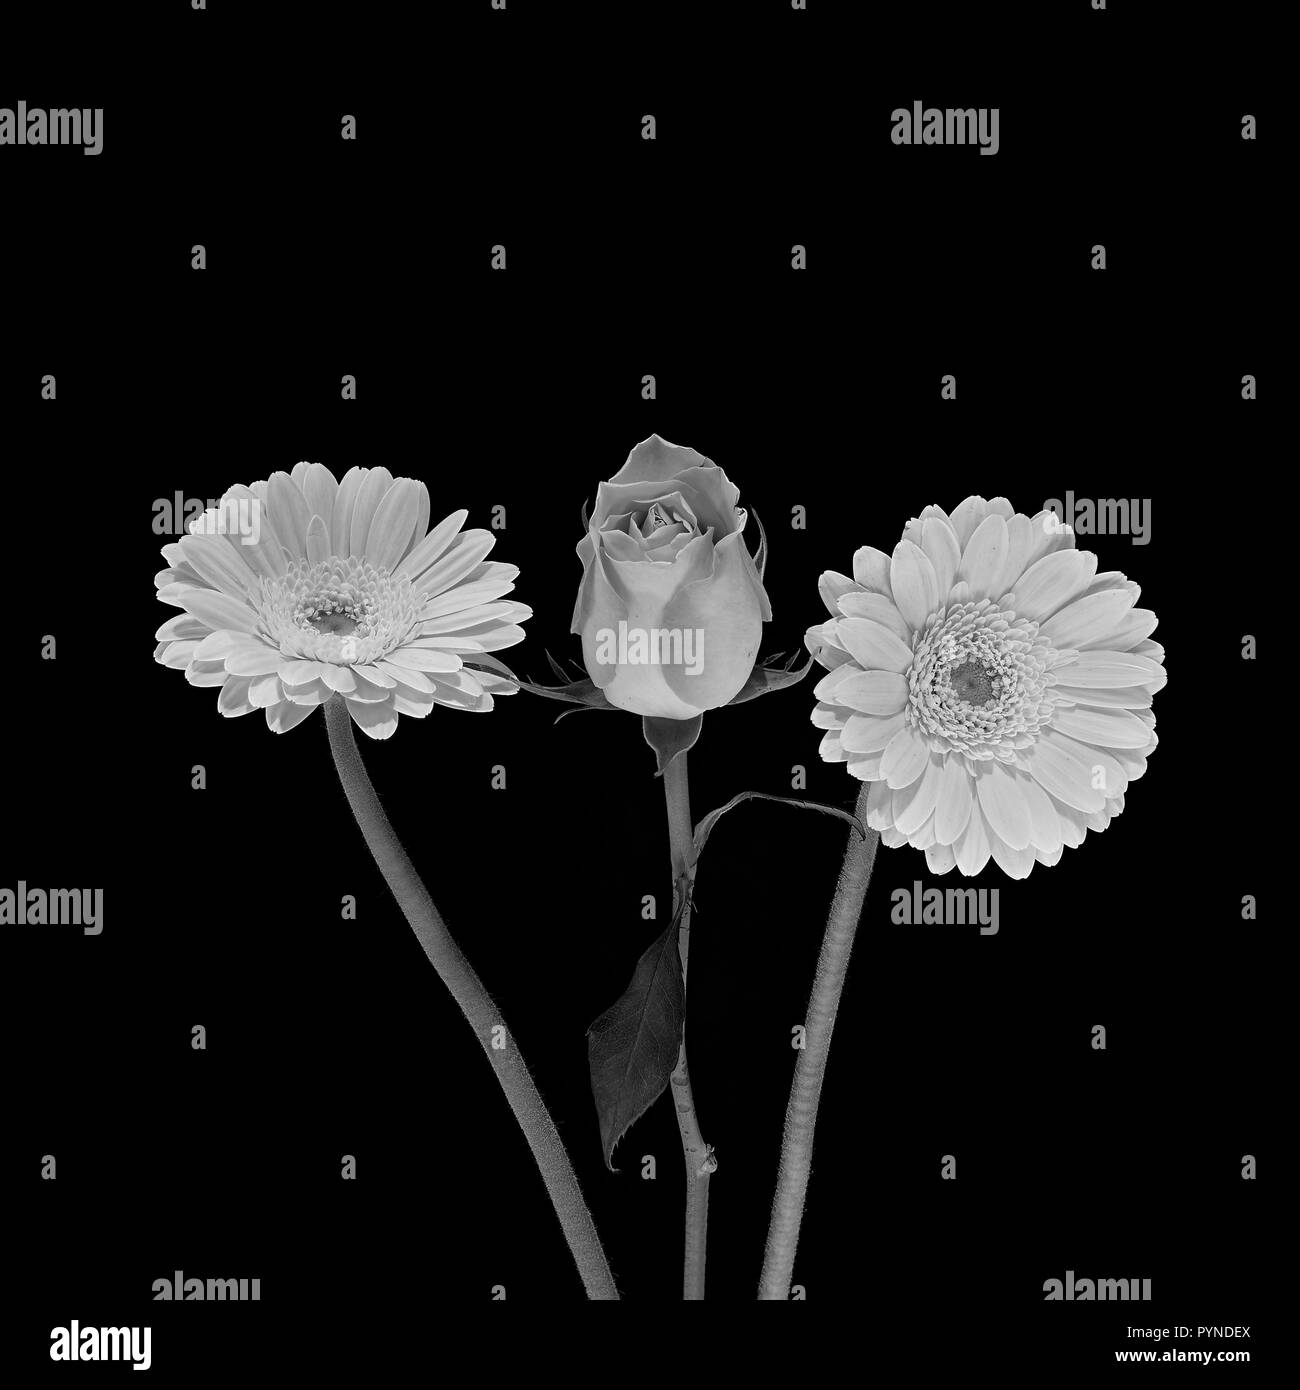 A portrait of two Gerbera Daisy (Gerbera Jamesonii) and a rose in black and white with a black background Stock Photo